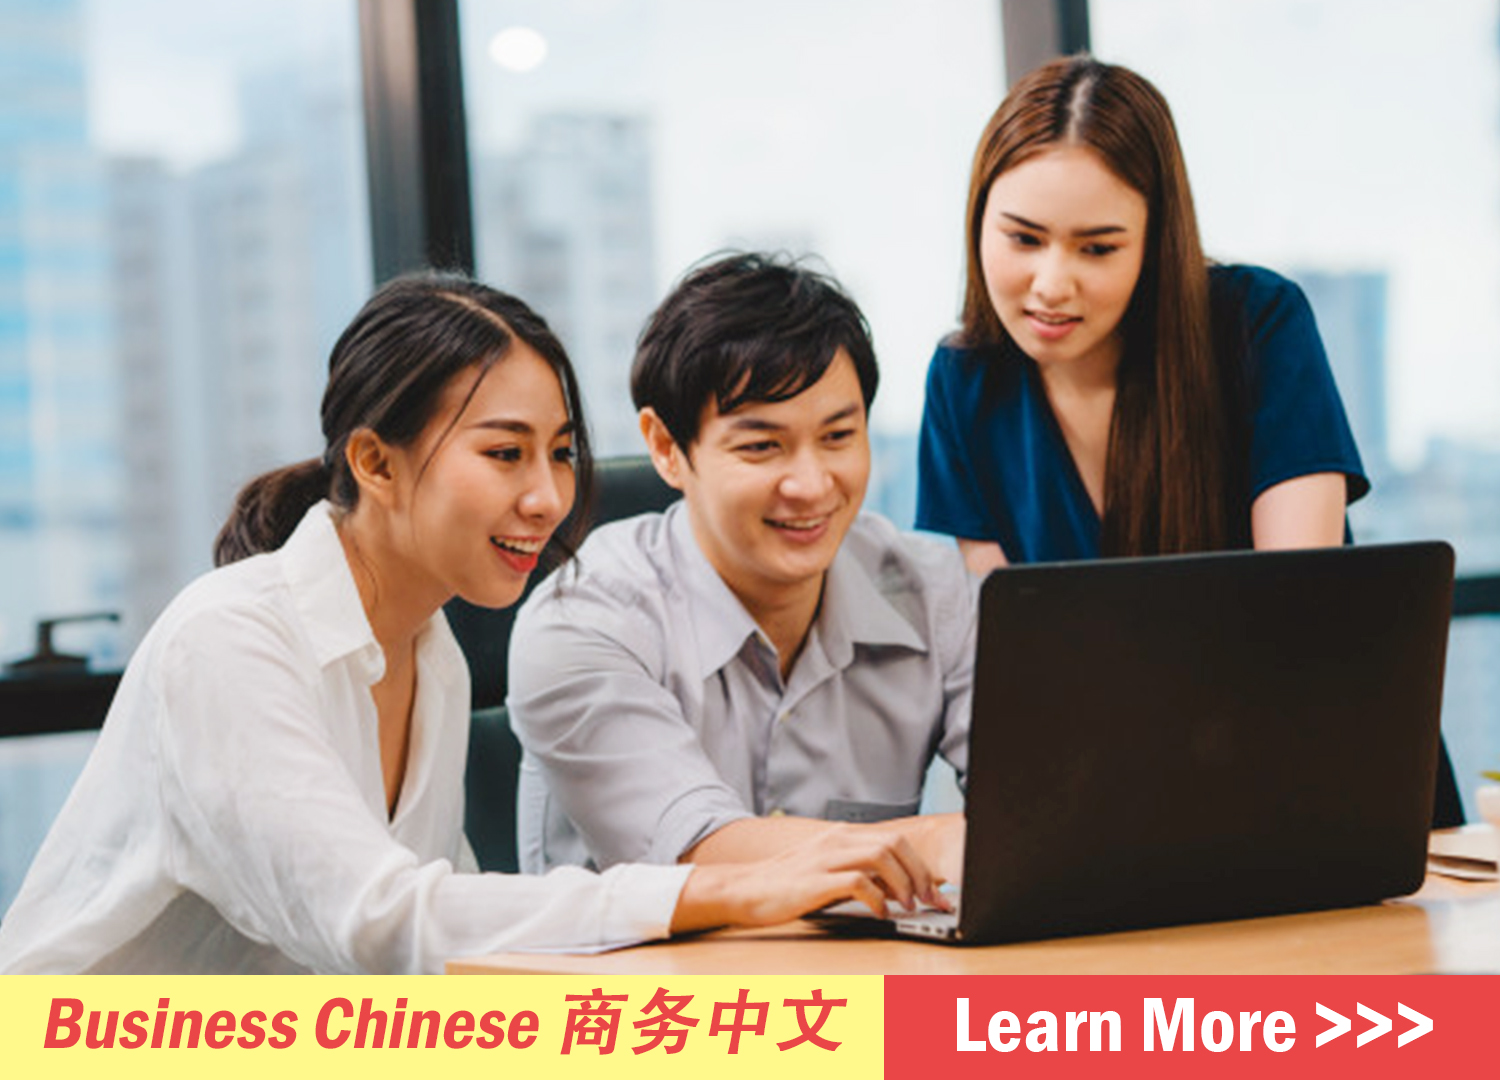 Business Chinese Learning Professional with Friends Happily Elite Linguistic Network